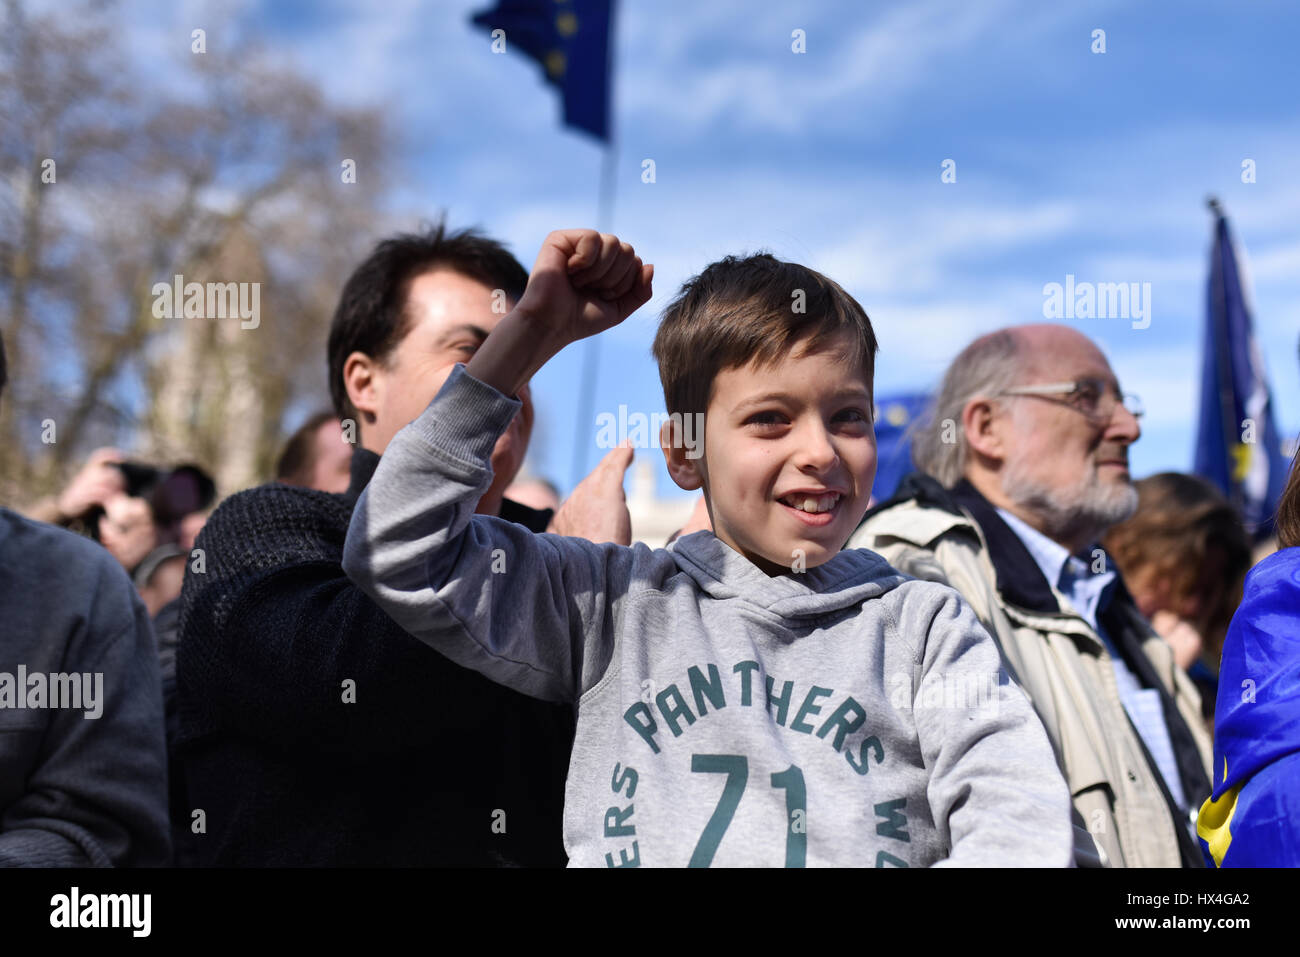 London, UK. 25th Mar, 2017. A young pro-EU protester on the March for Europe cheers in Parliament Square. Thousands marched from Park Lane to Parliament Square to oppose Brexit and support the European Union. Credit: Jacob Sacks-Jones/Alamy Live News. Stock Photo